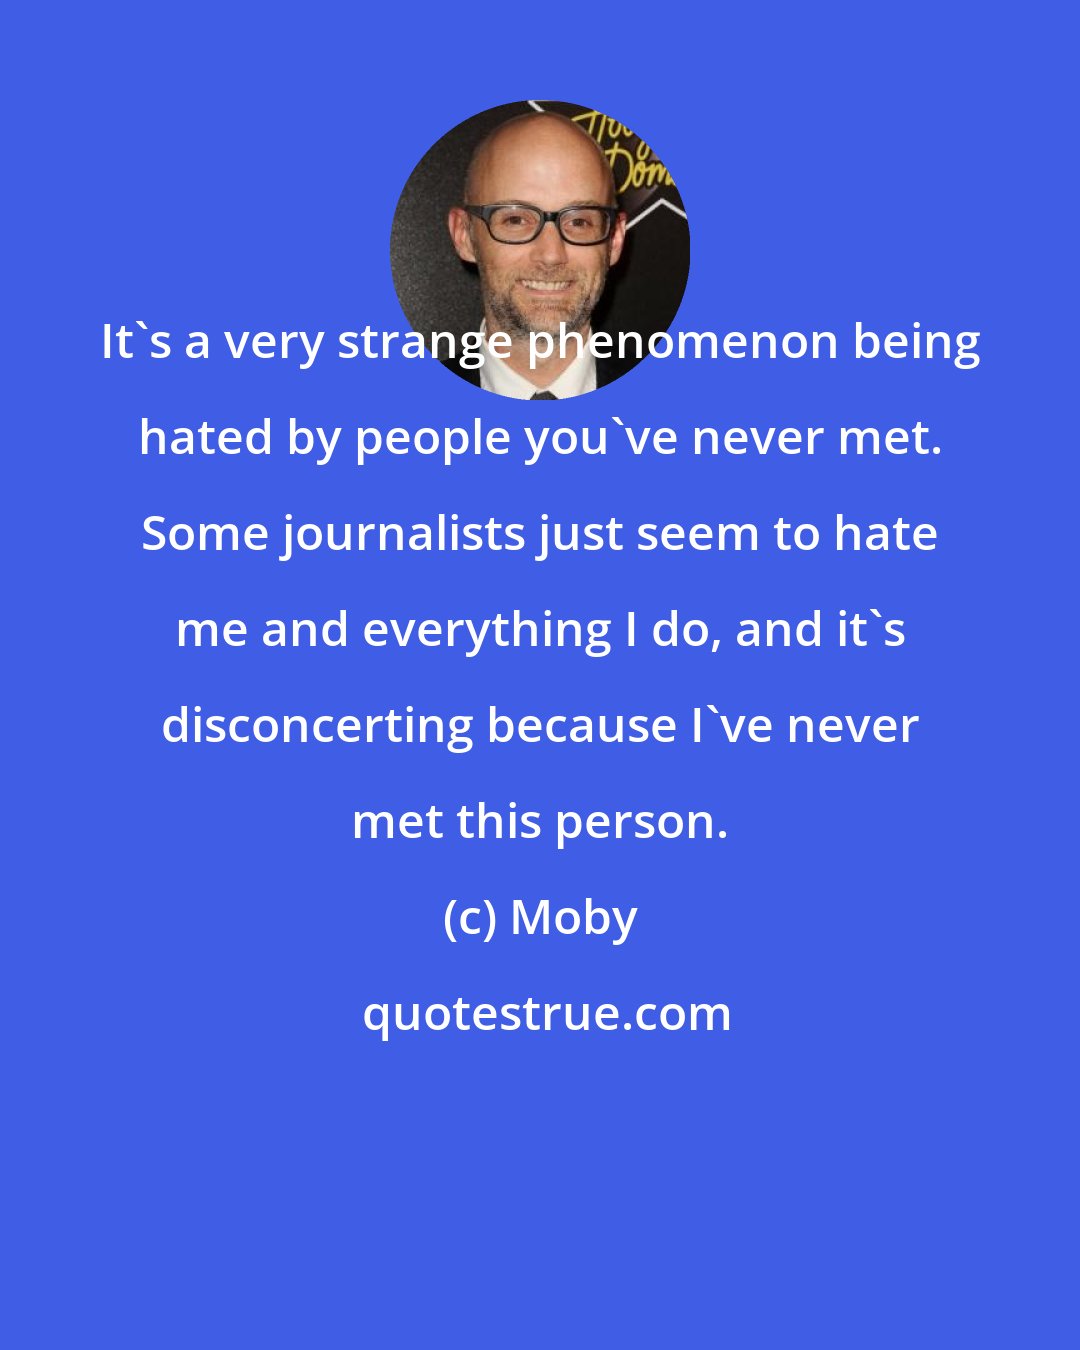 Moby: It's a very strange phenomenon being hated by people you've never met. Some journalists just seem to hate me and everything I do, and it's disconcerting because I've never met this person.